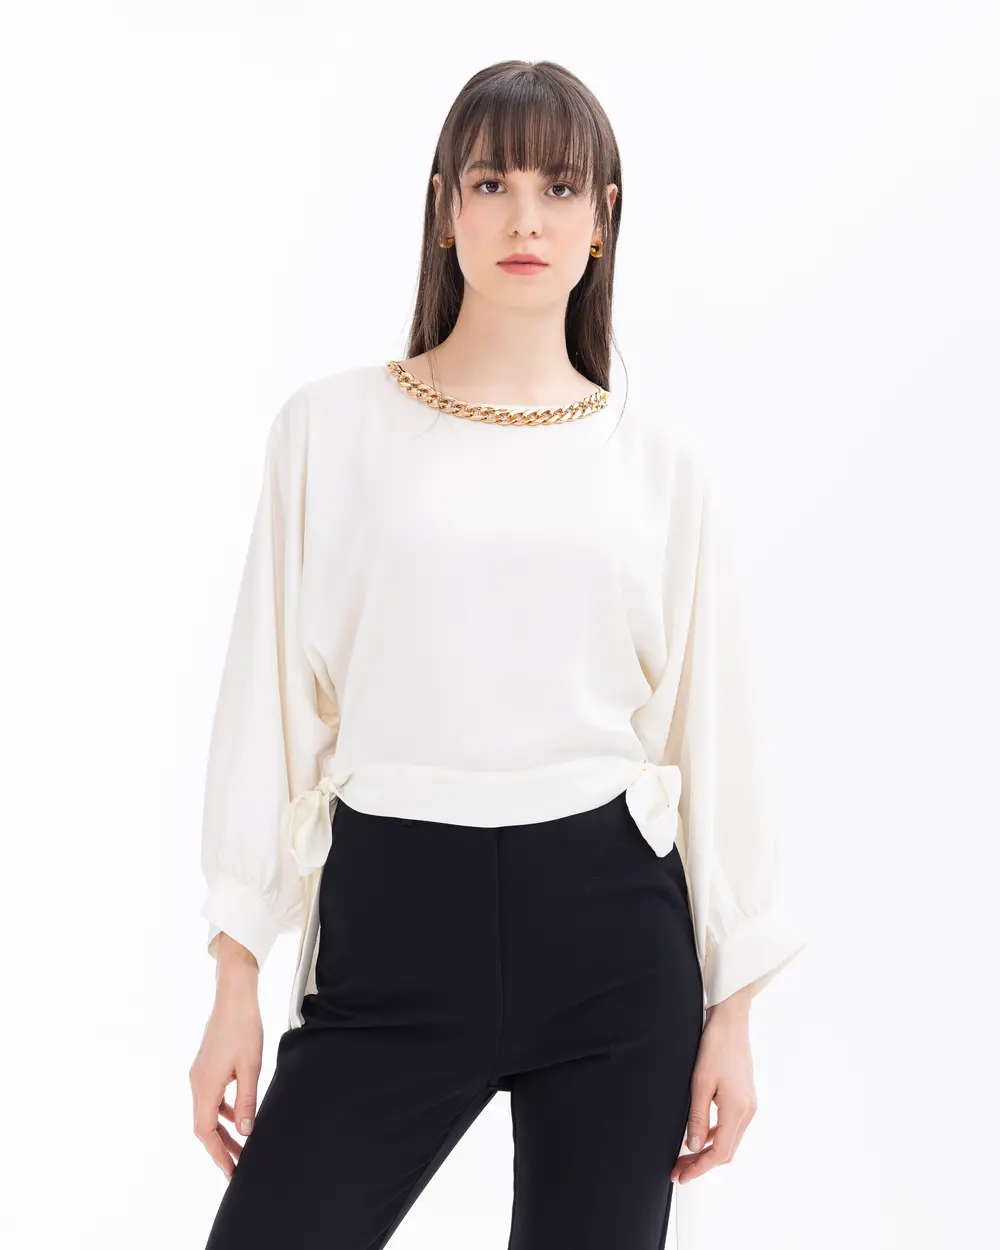 Waist Length Blouse with Chain Accessories